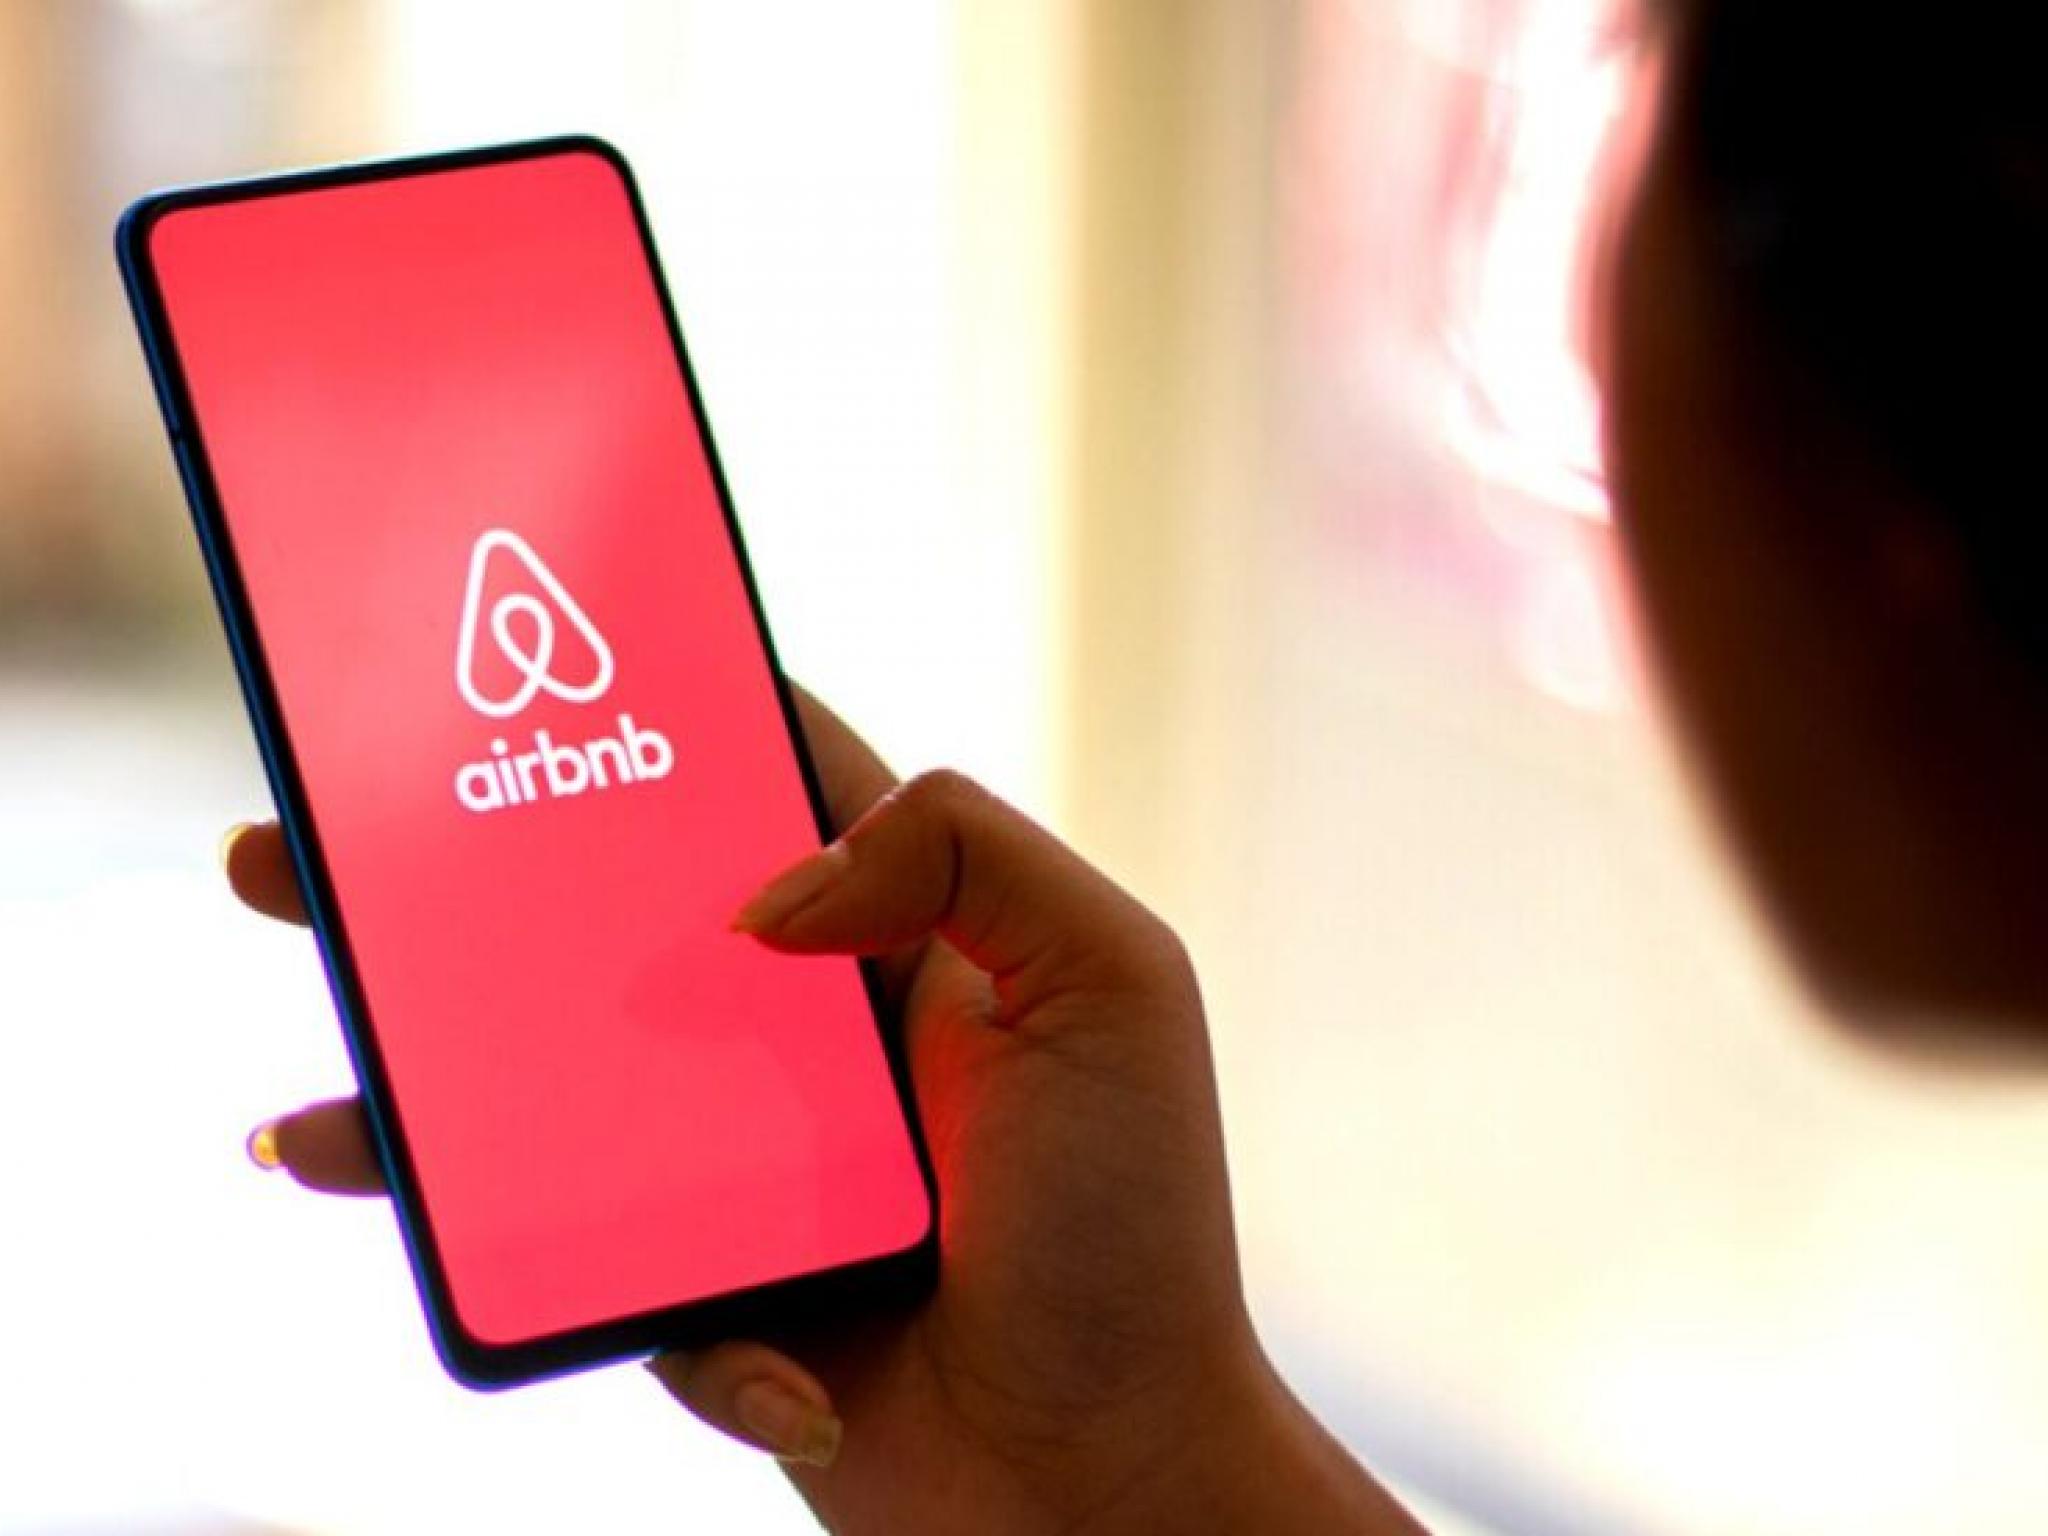  airbnb-best-buy-and-2-other-stocks-insiders-are-selling 